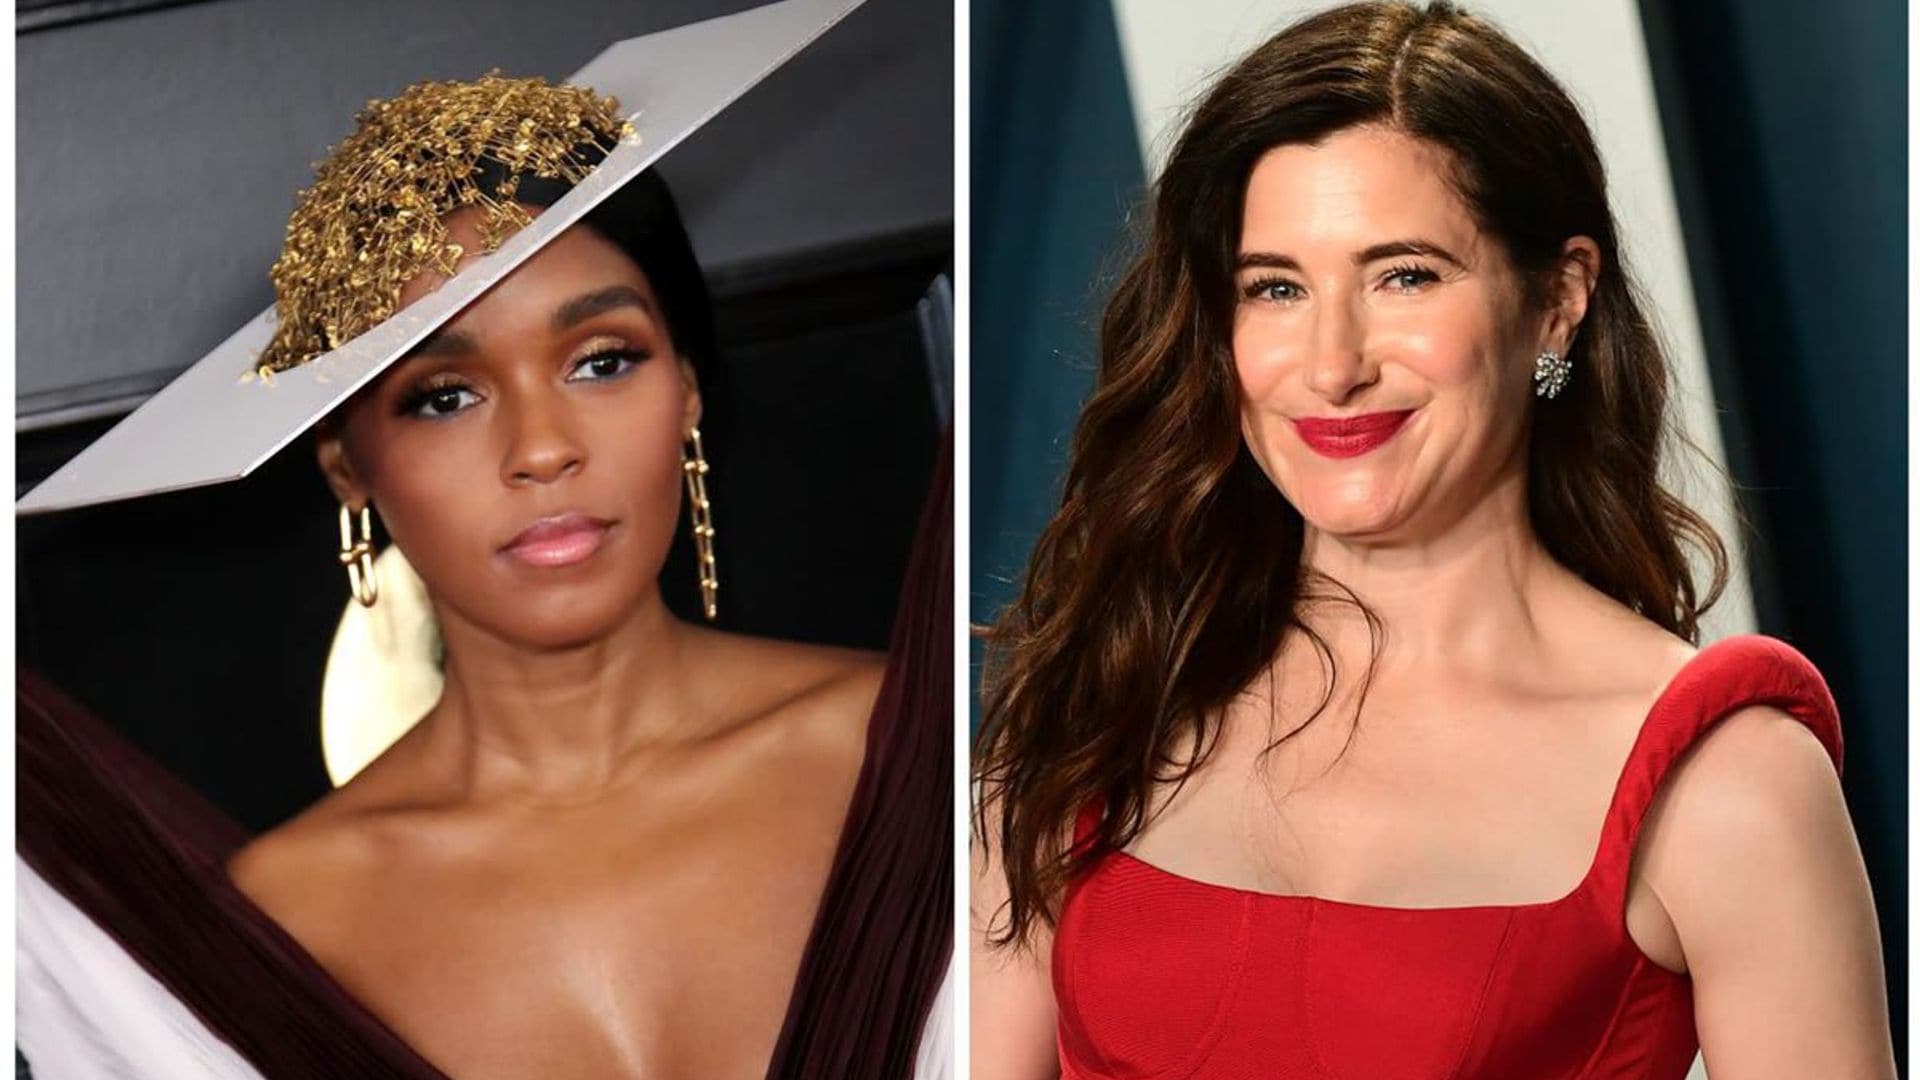 Janelle Monáe and Kathryn Hahn are joining the cast of ‘Knives Out’